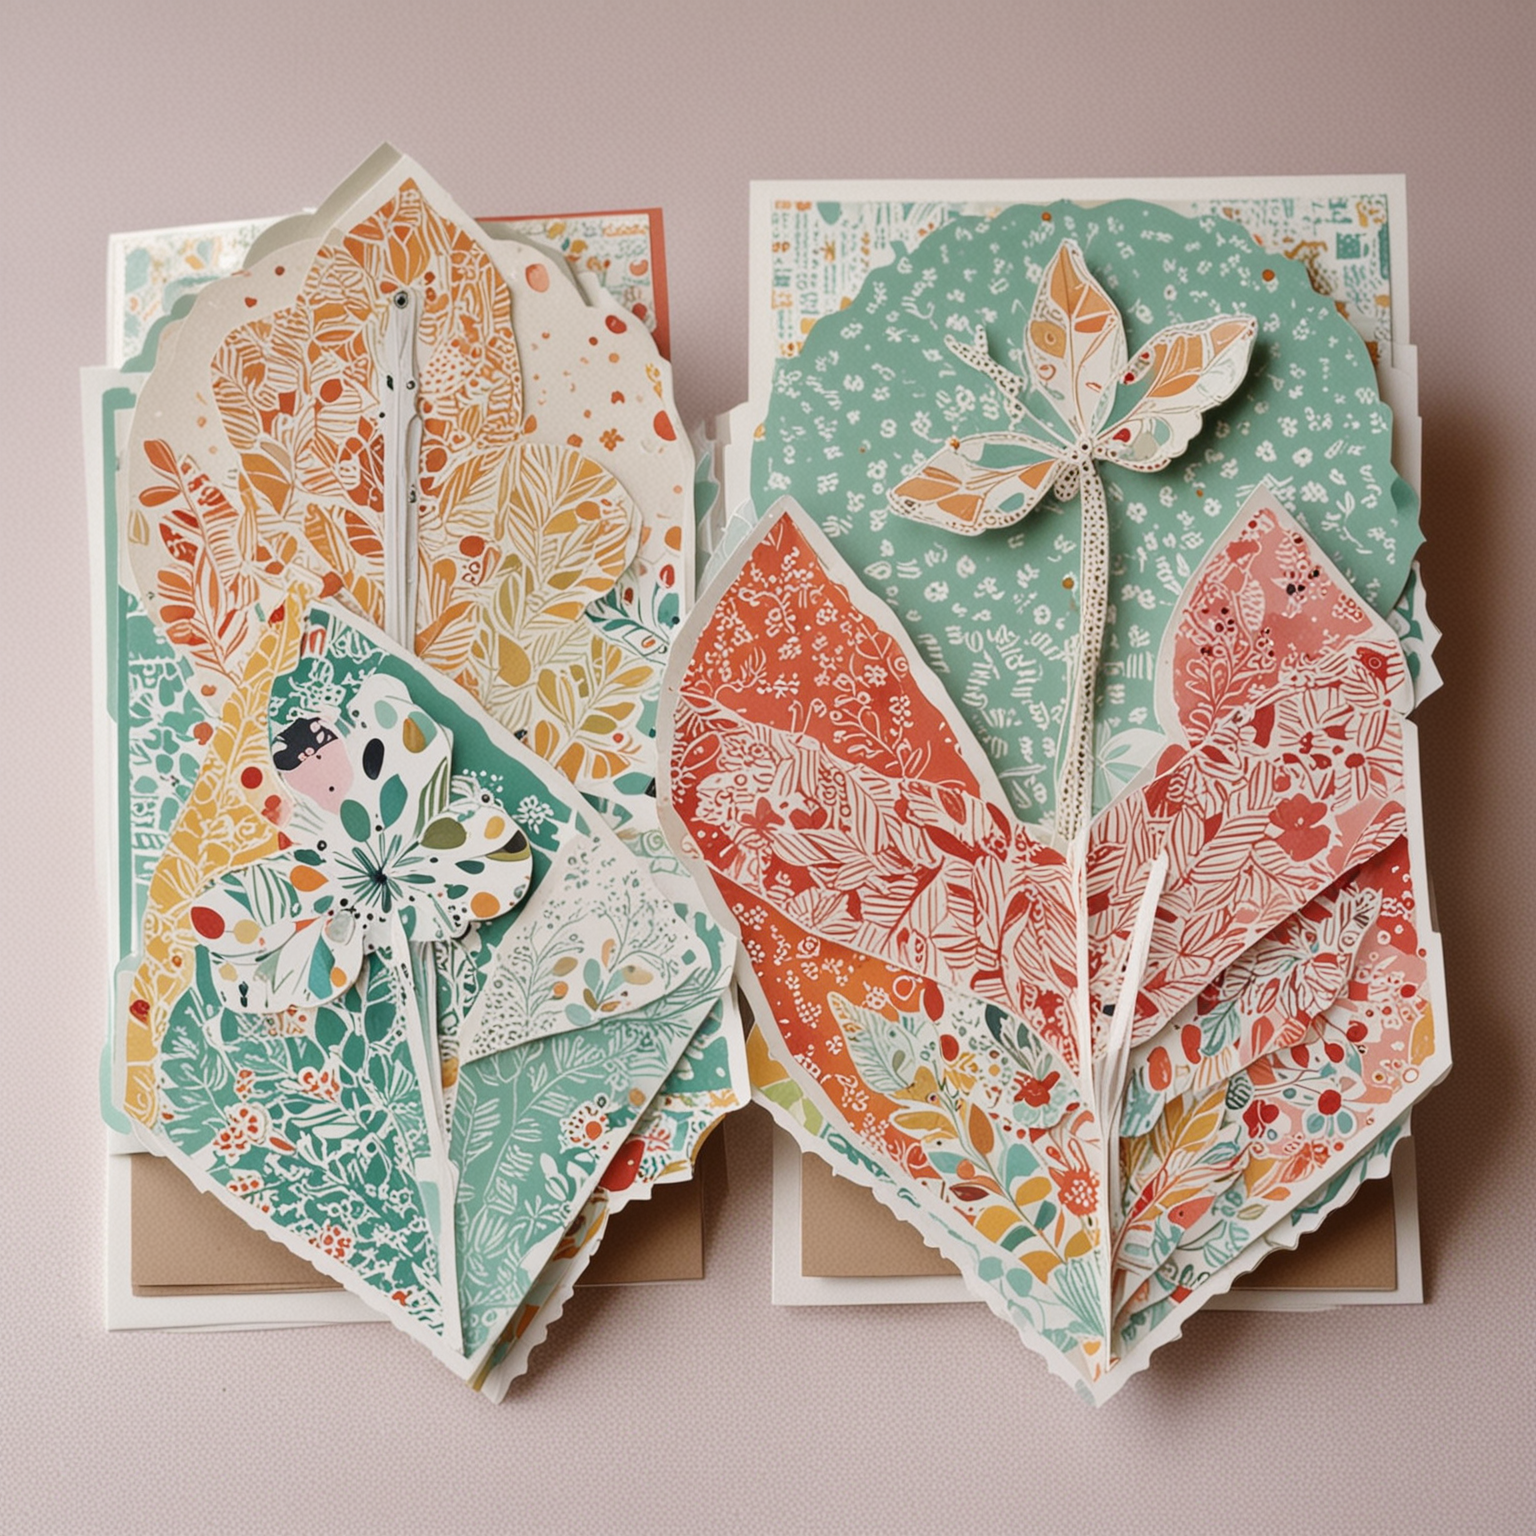 original shaped scrapbooking cards in a modern style